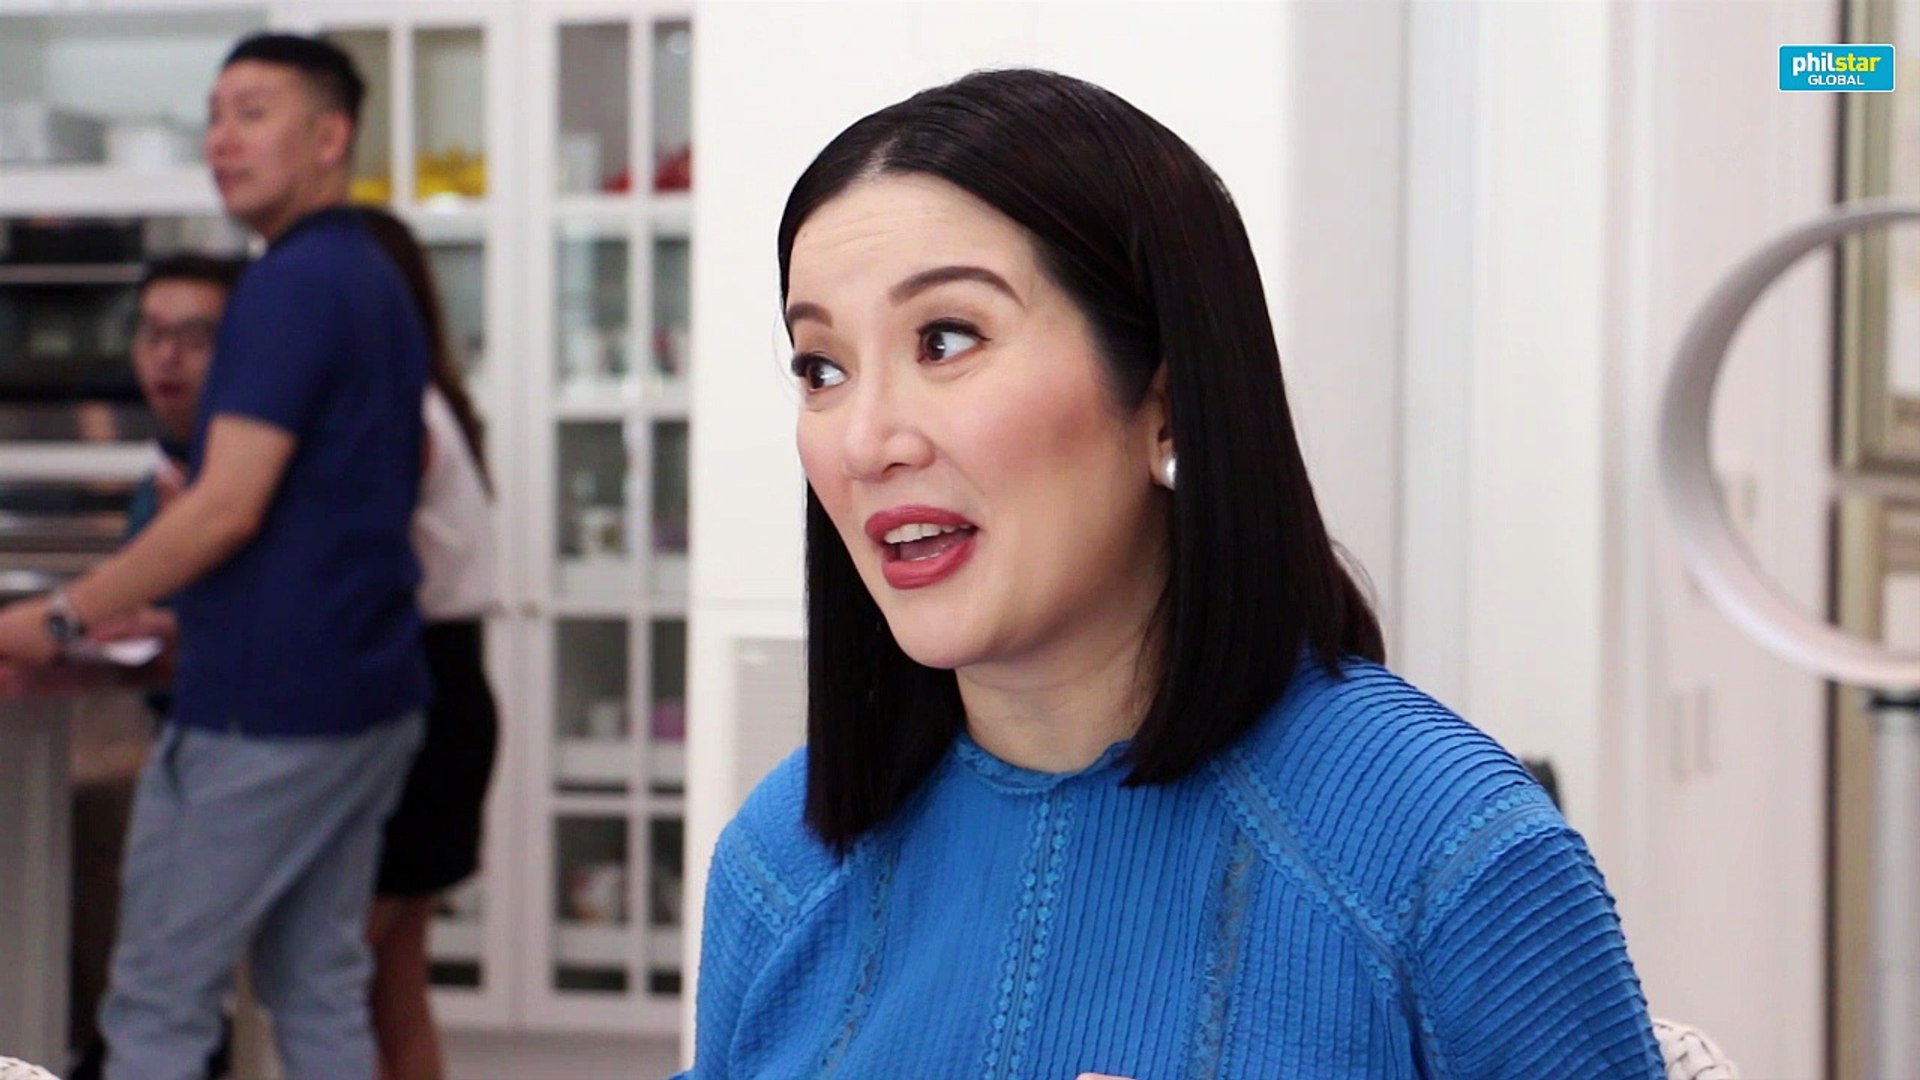 Kris aquino reveals what diet works for her